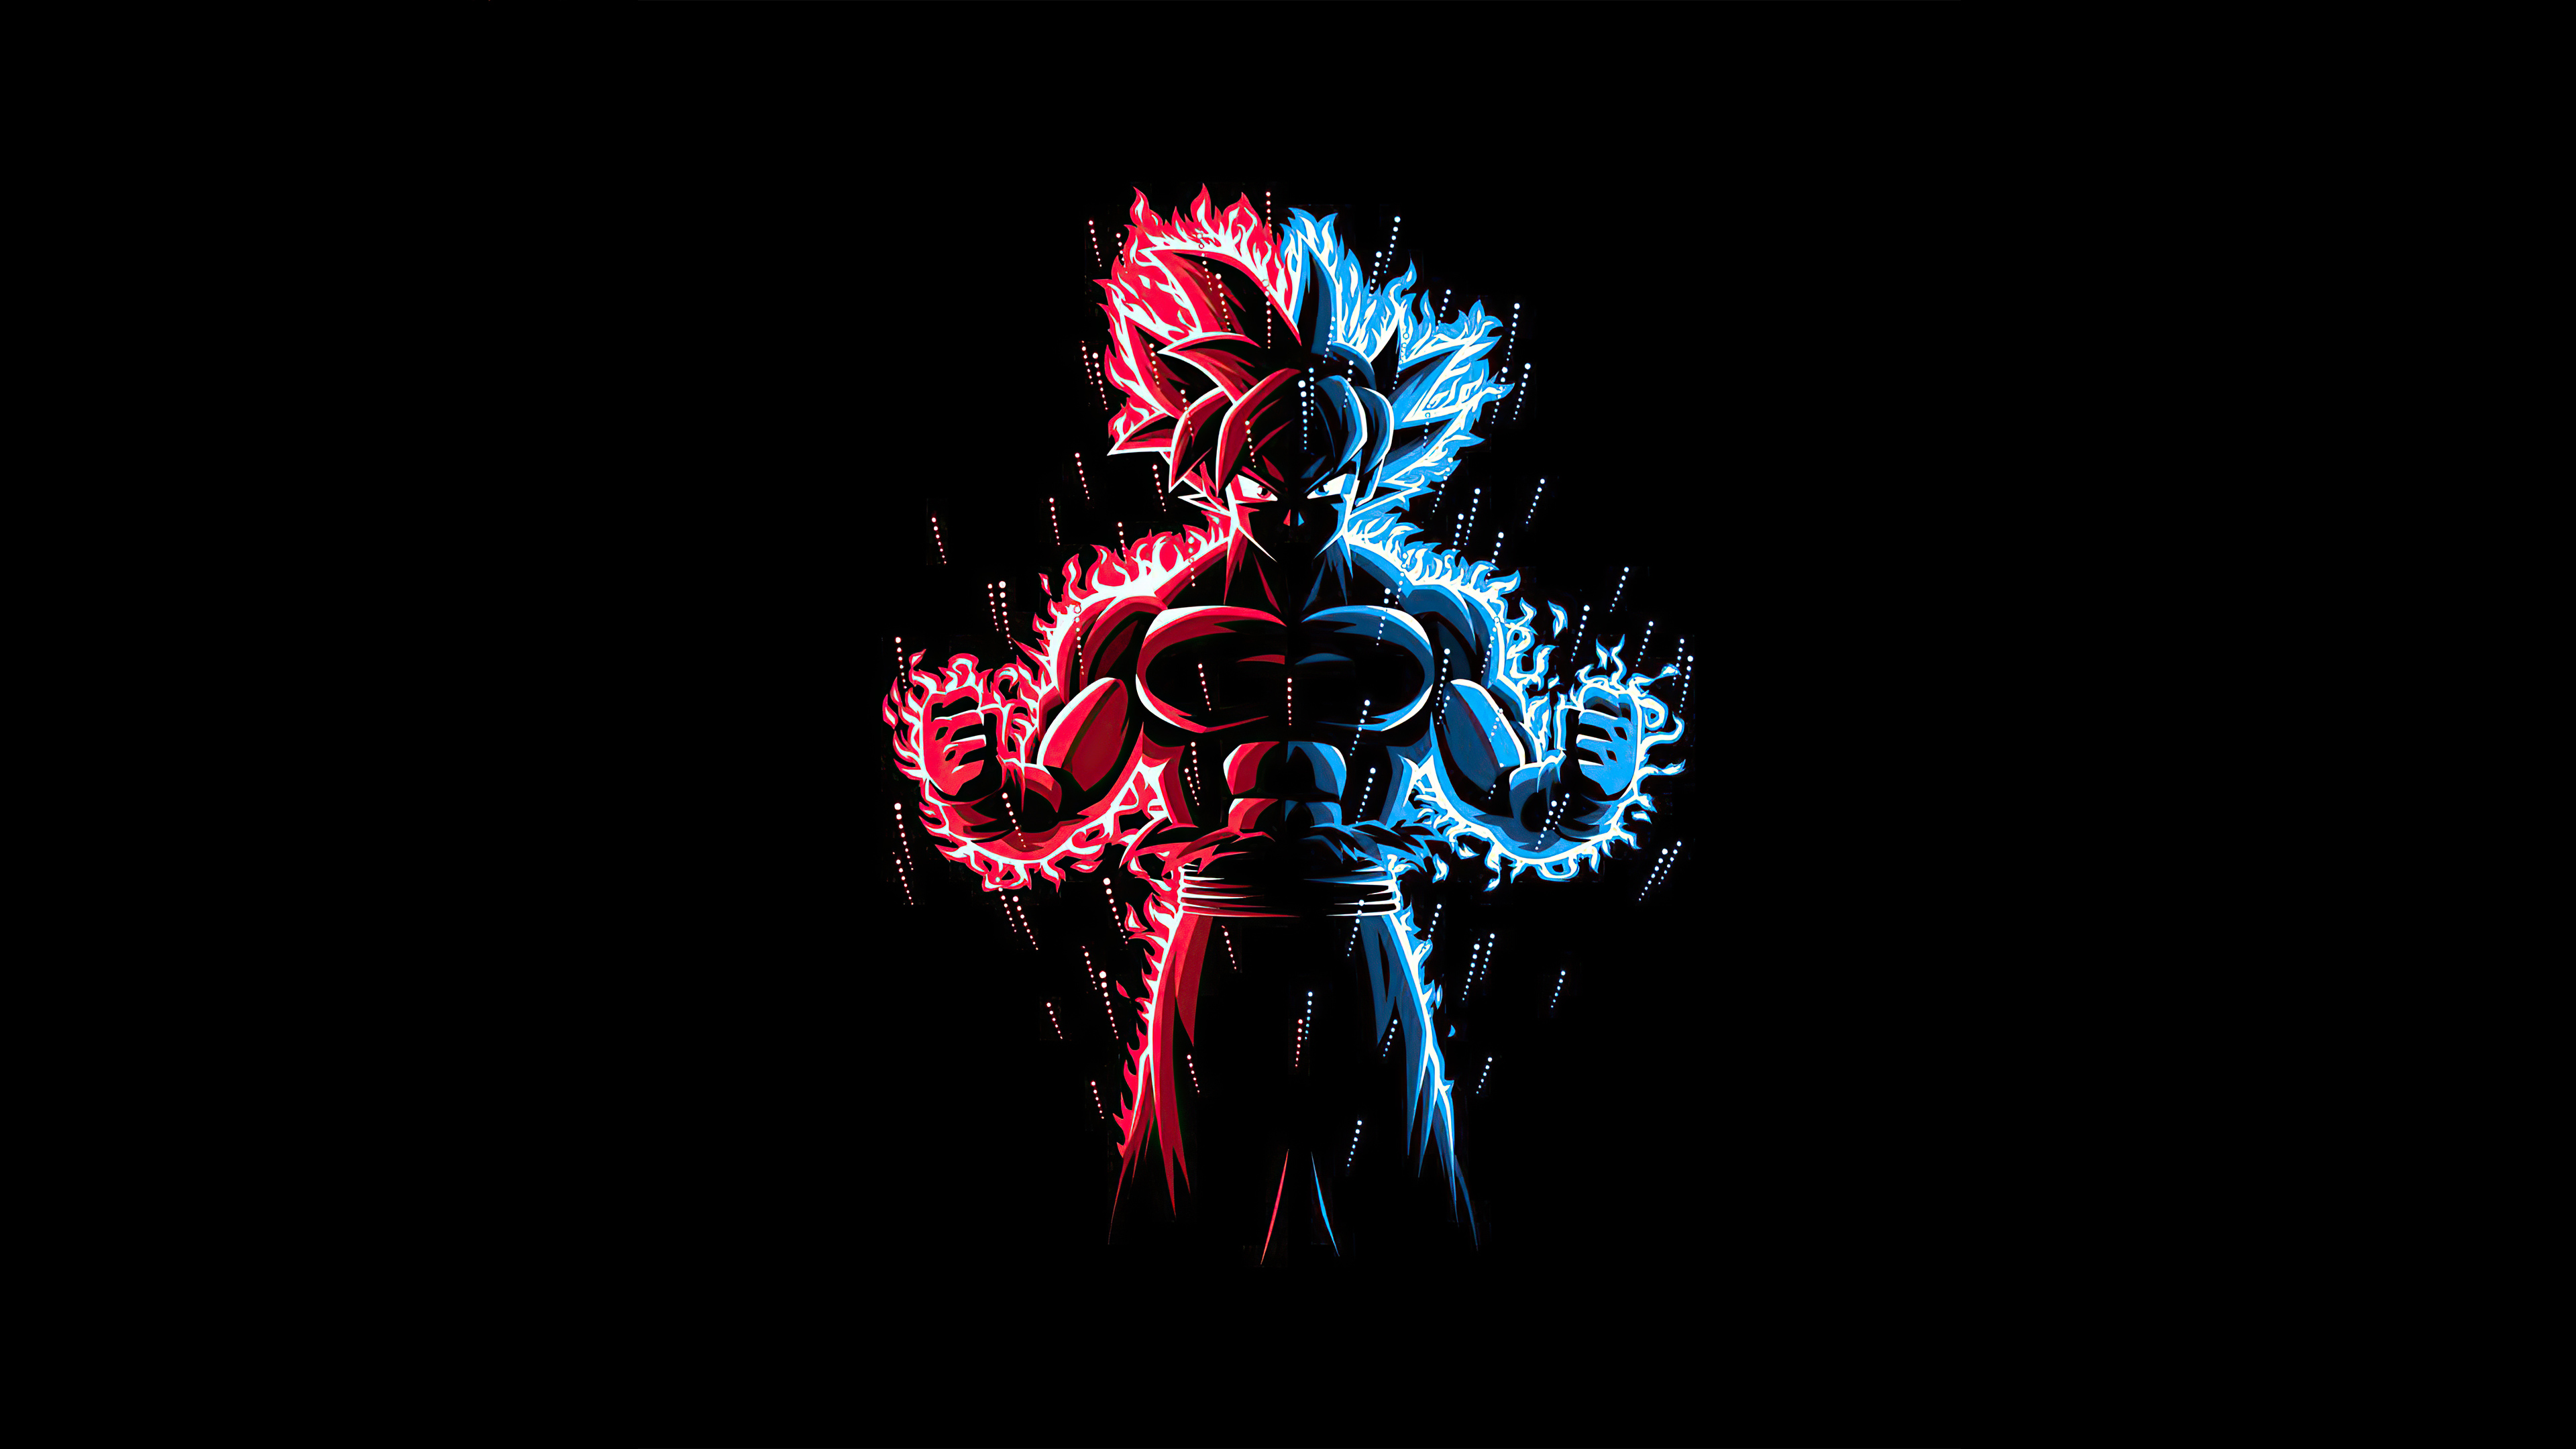 21+] Red and Blue Anime Wallpapers - WallpaperSafari